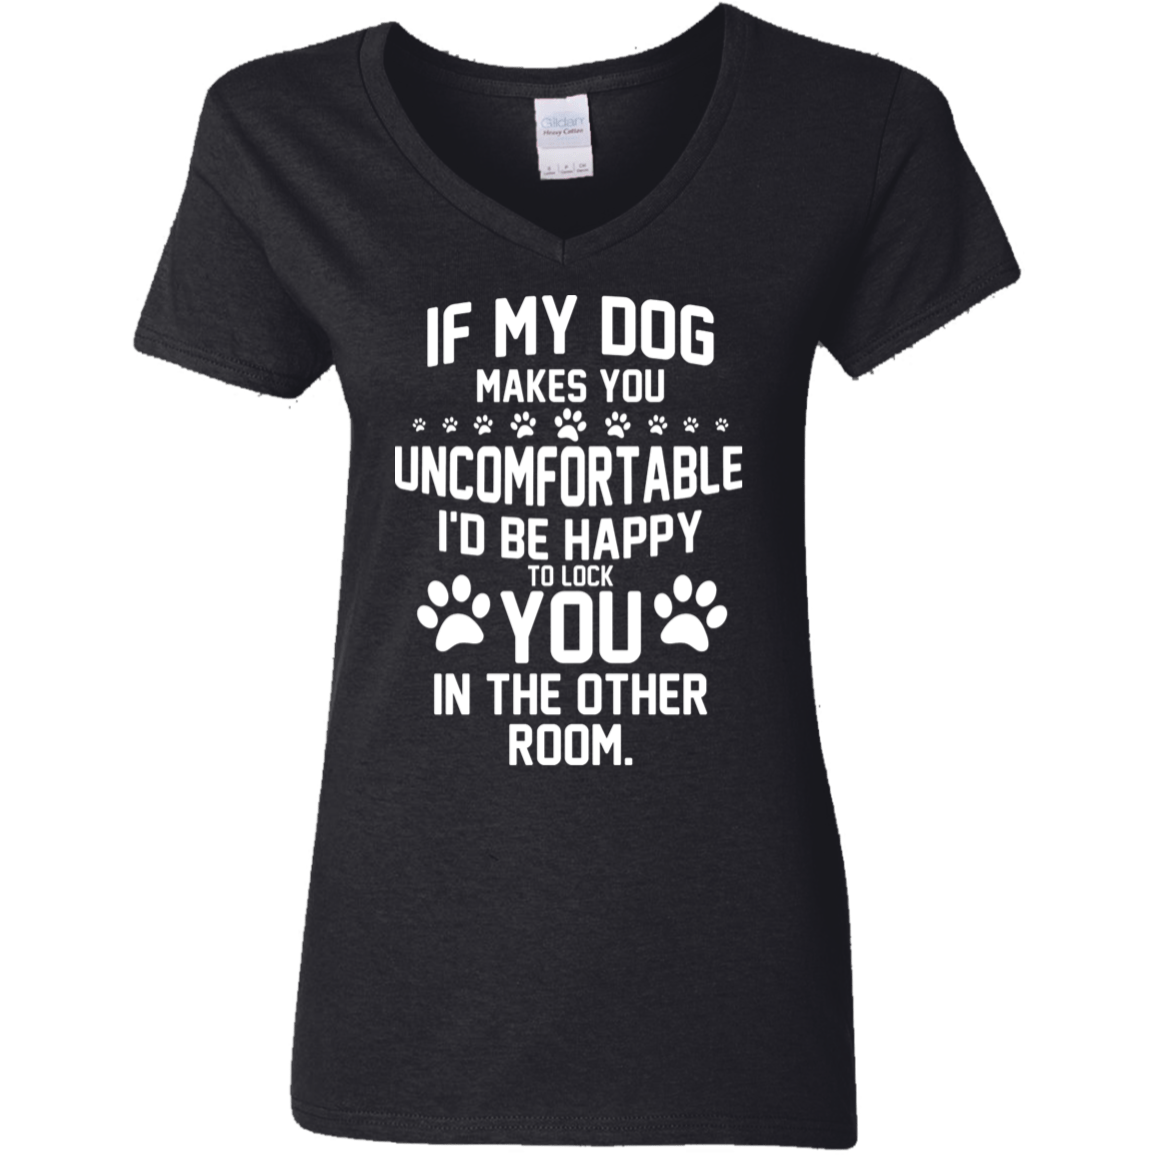 If My Dog Makes You Uncomfortable - Ladies V Neck.